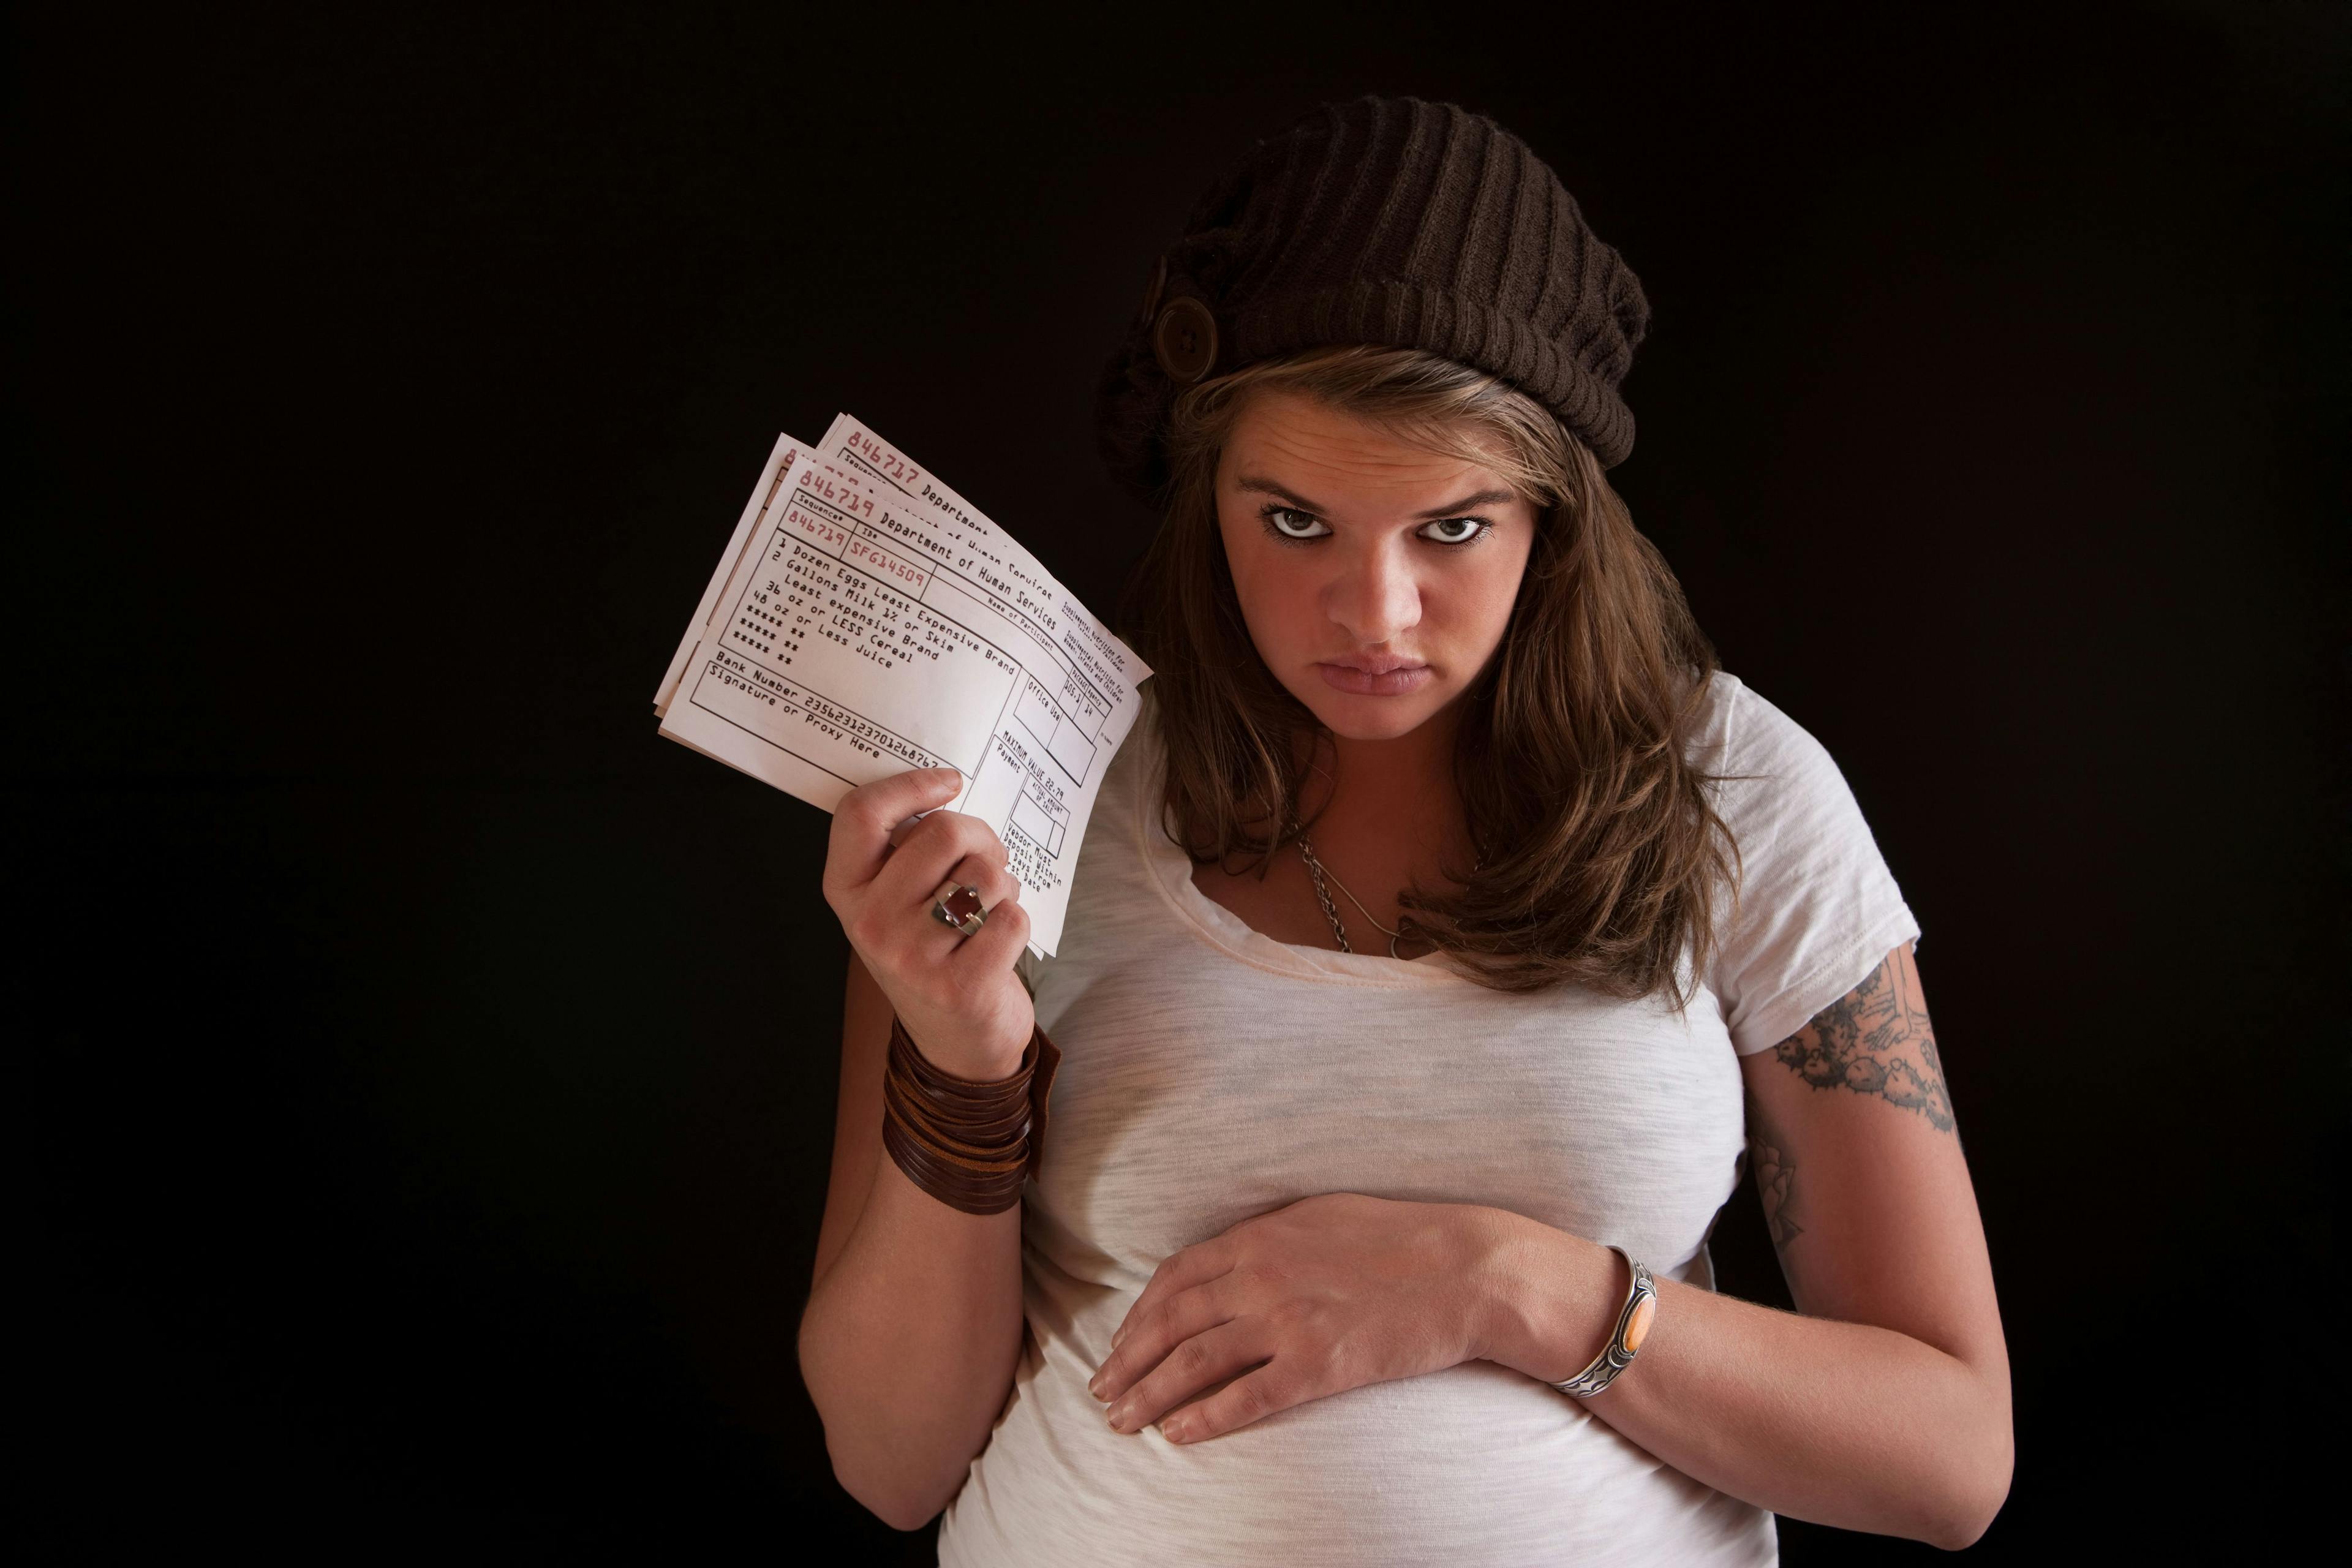 ACA Medicaid expansion and prenatal insurance in low-income women